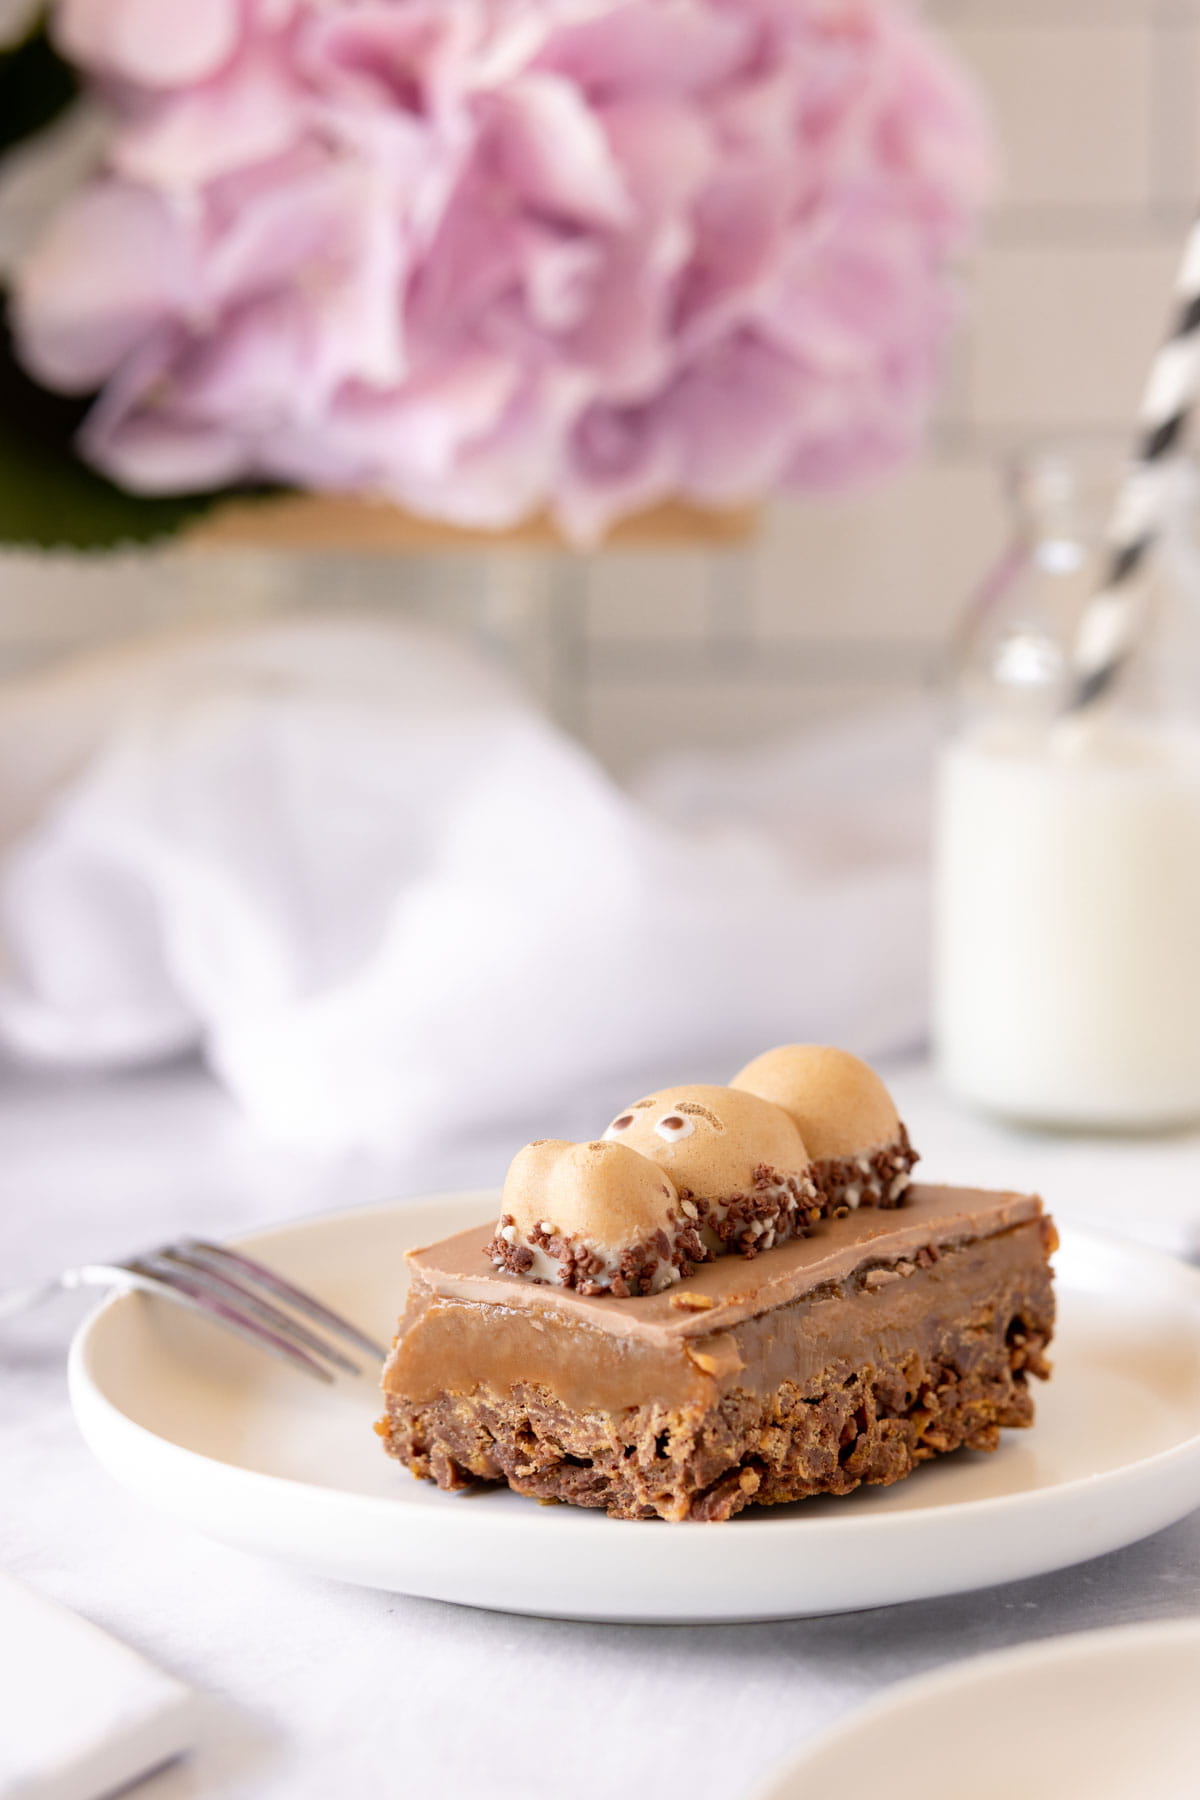 Chocolate cornflake slice with a layer of caramel sauce on a whit plate with a pink hydrangea flower